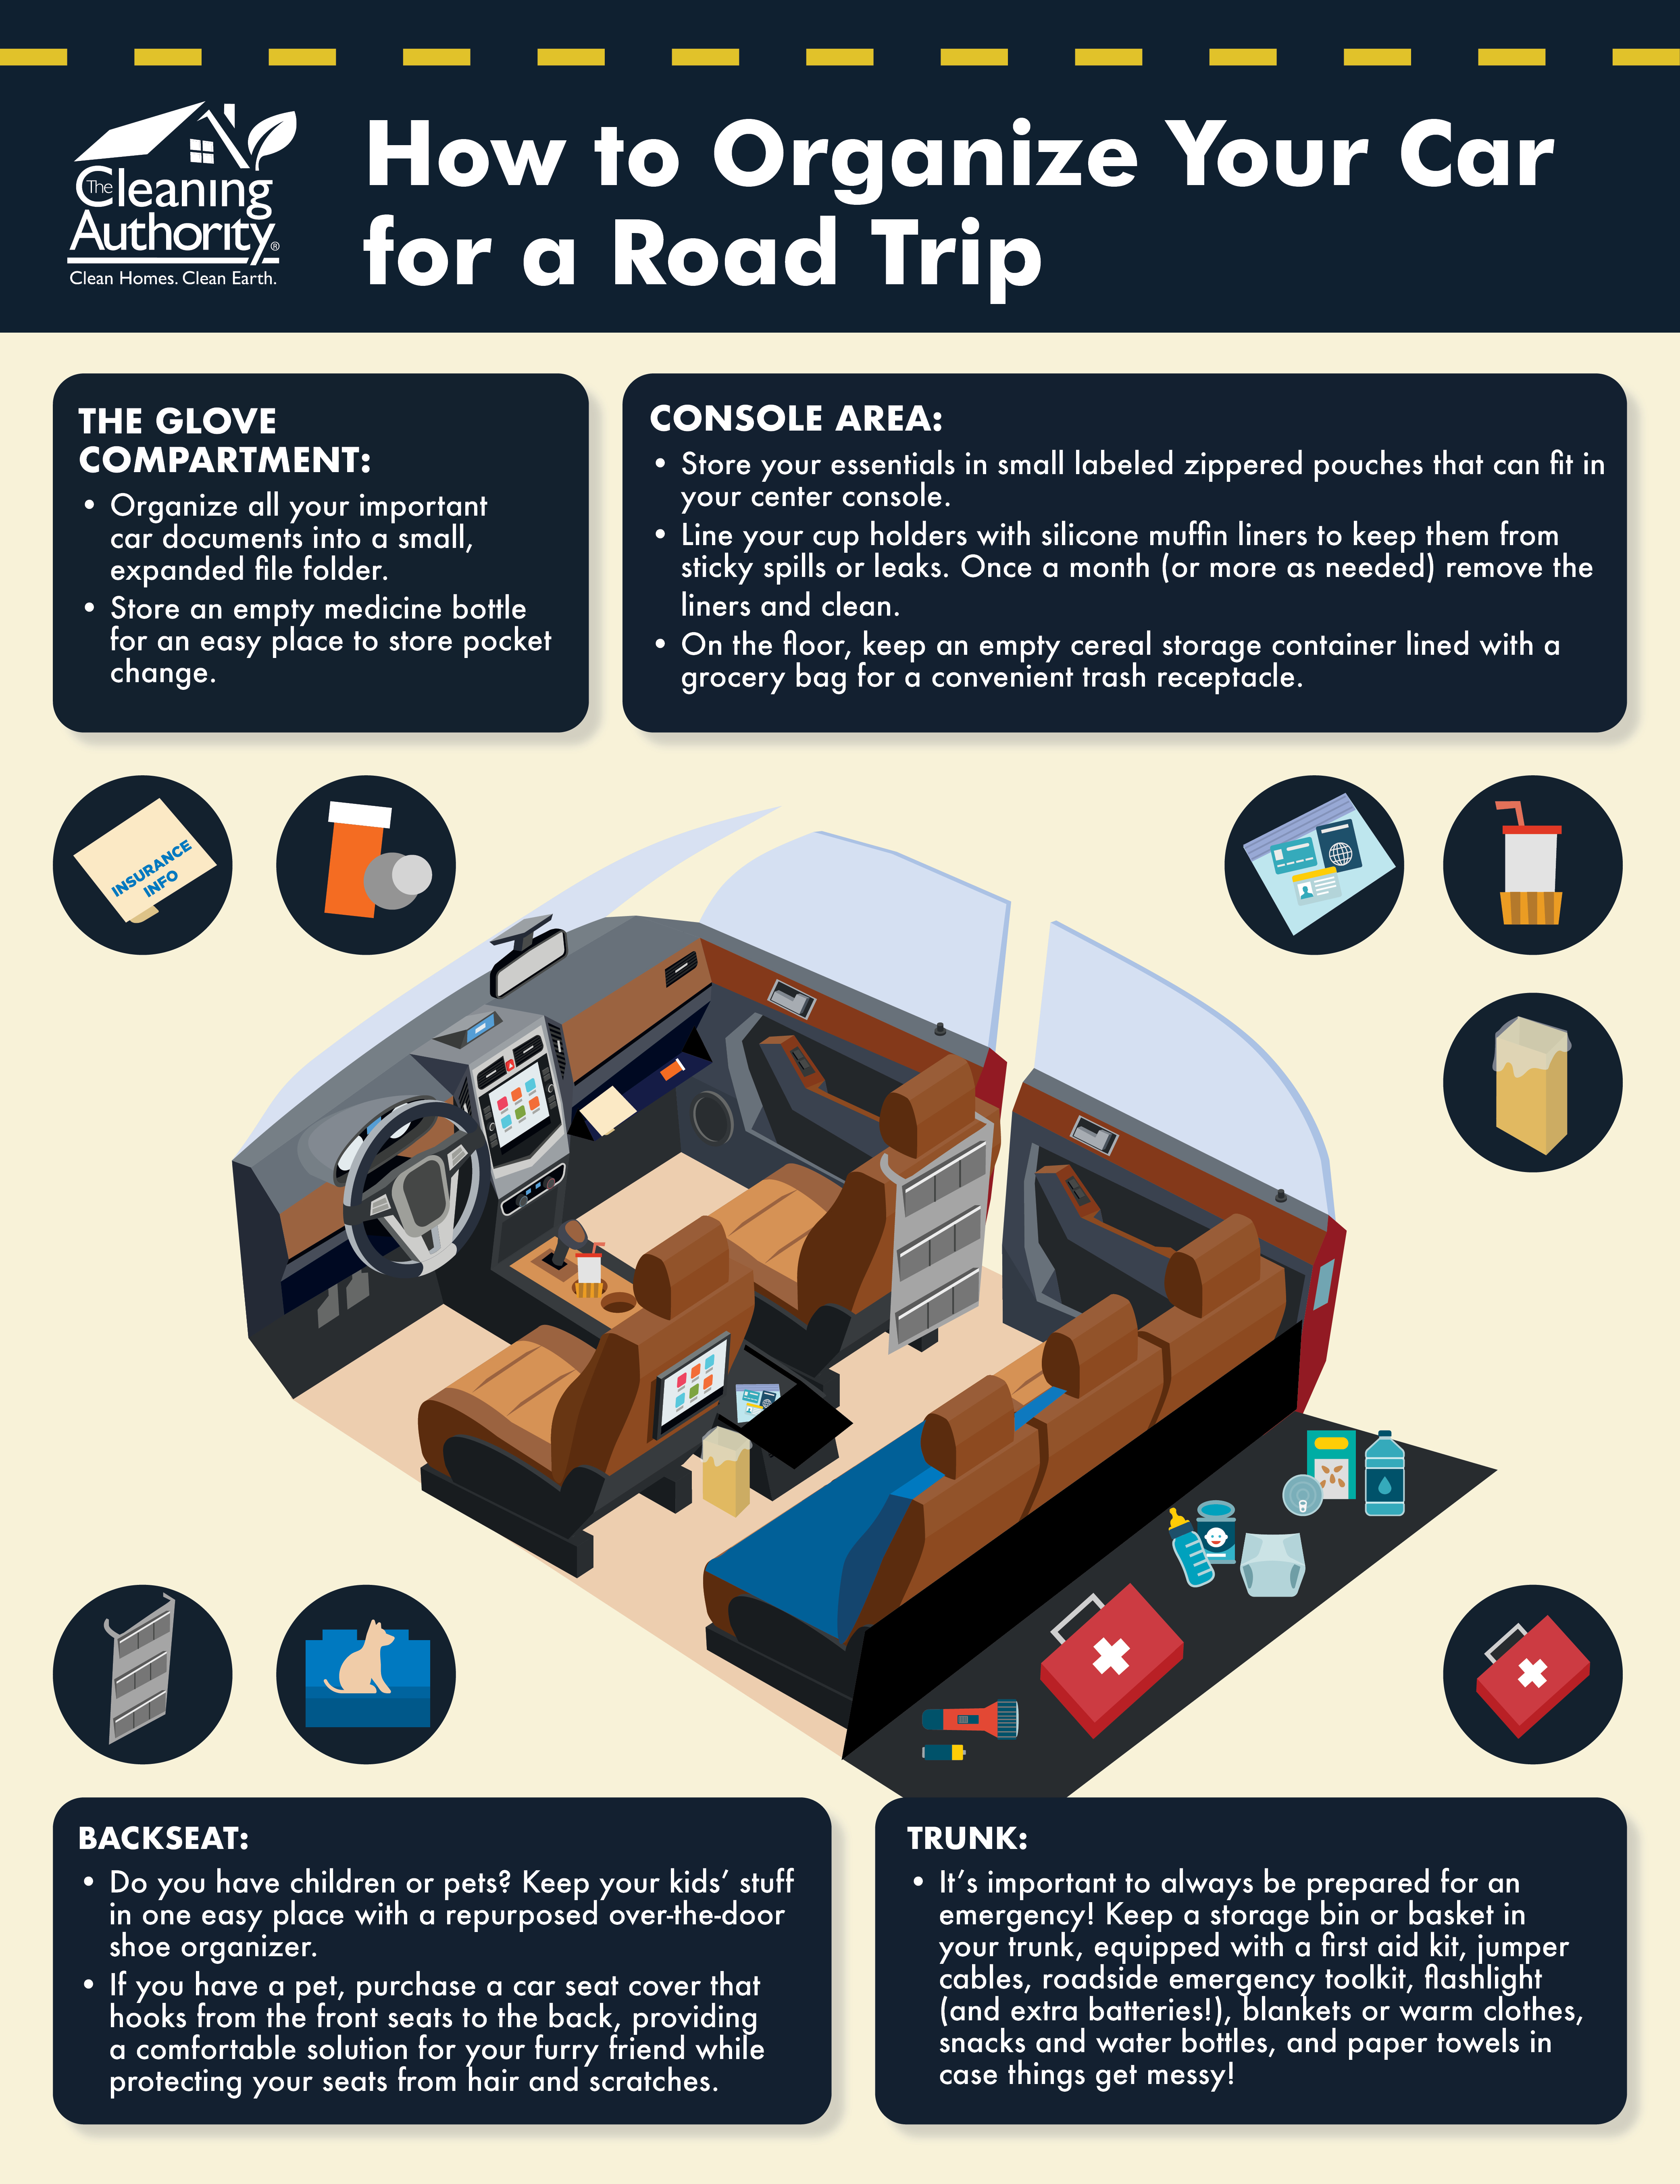 How to Organize Your Car for a Road Trip